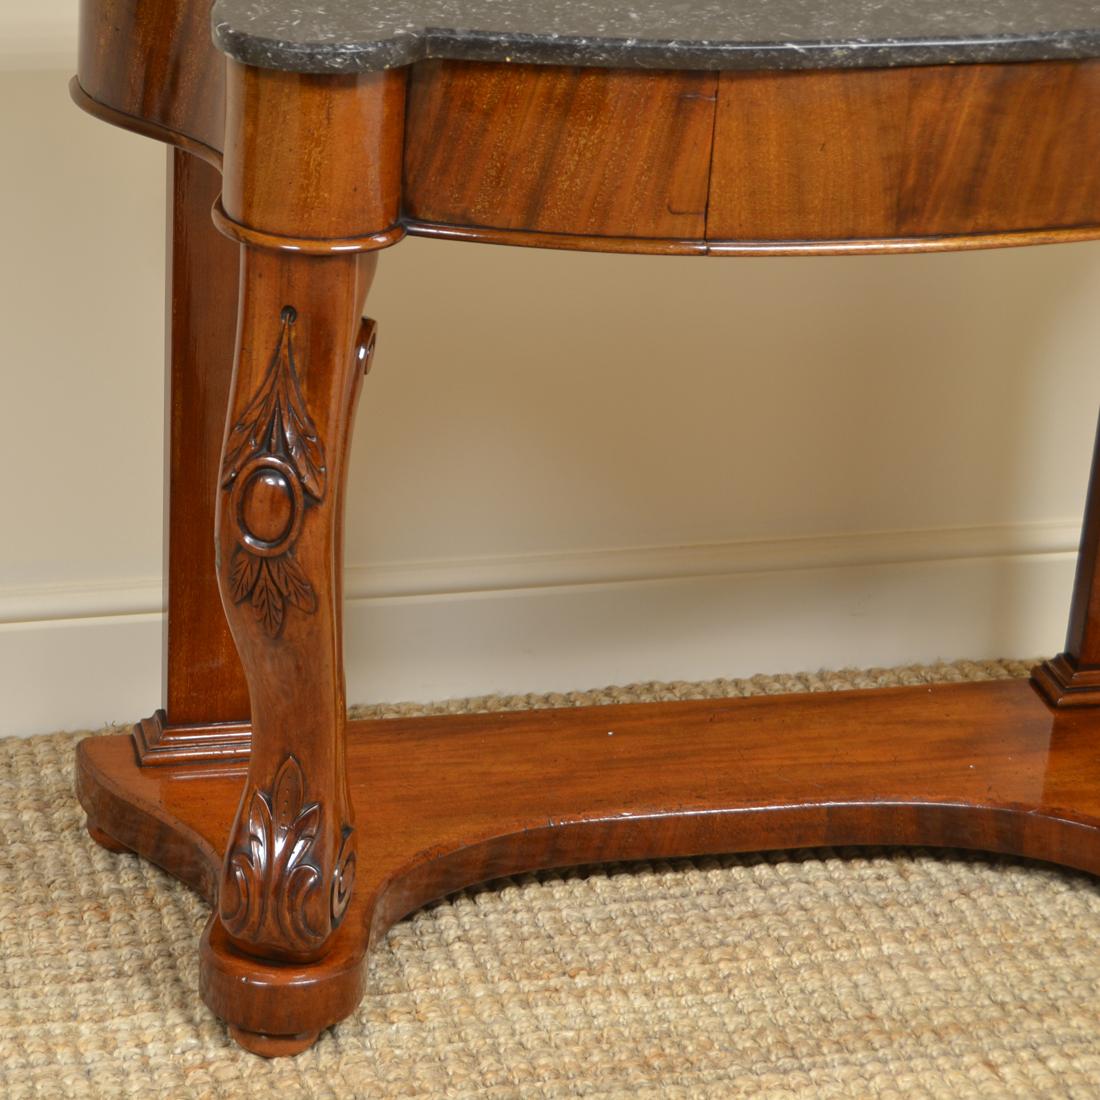 Fine quality marble-top Victorian antique console table
Dating from circa 1870 this fine quality Victorian mahogany antique console table has a shaped marble top above a bow fronted frieze with concealed drawer and stands on elegant carved front